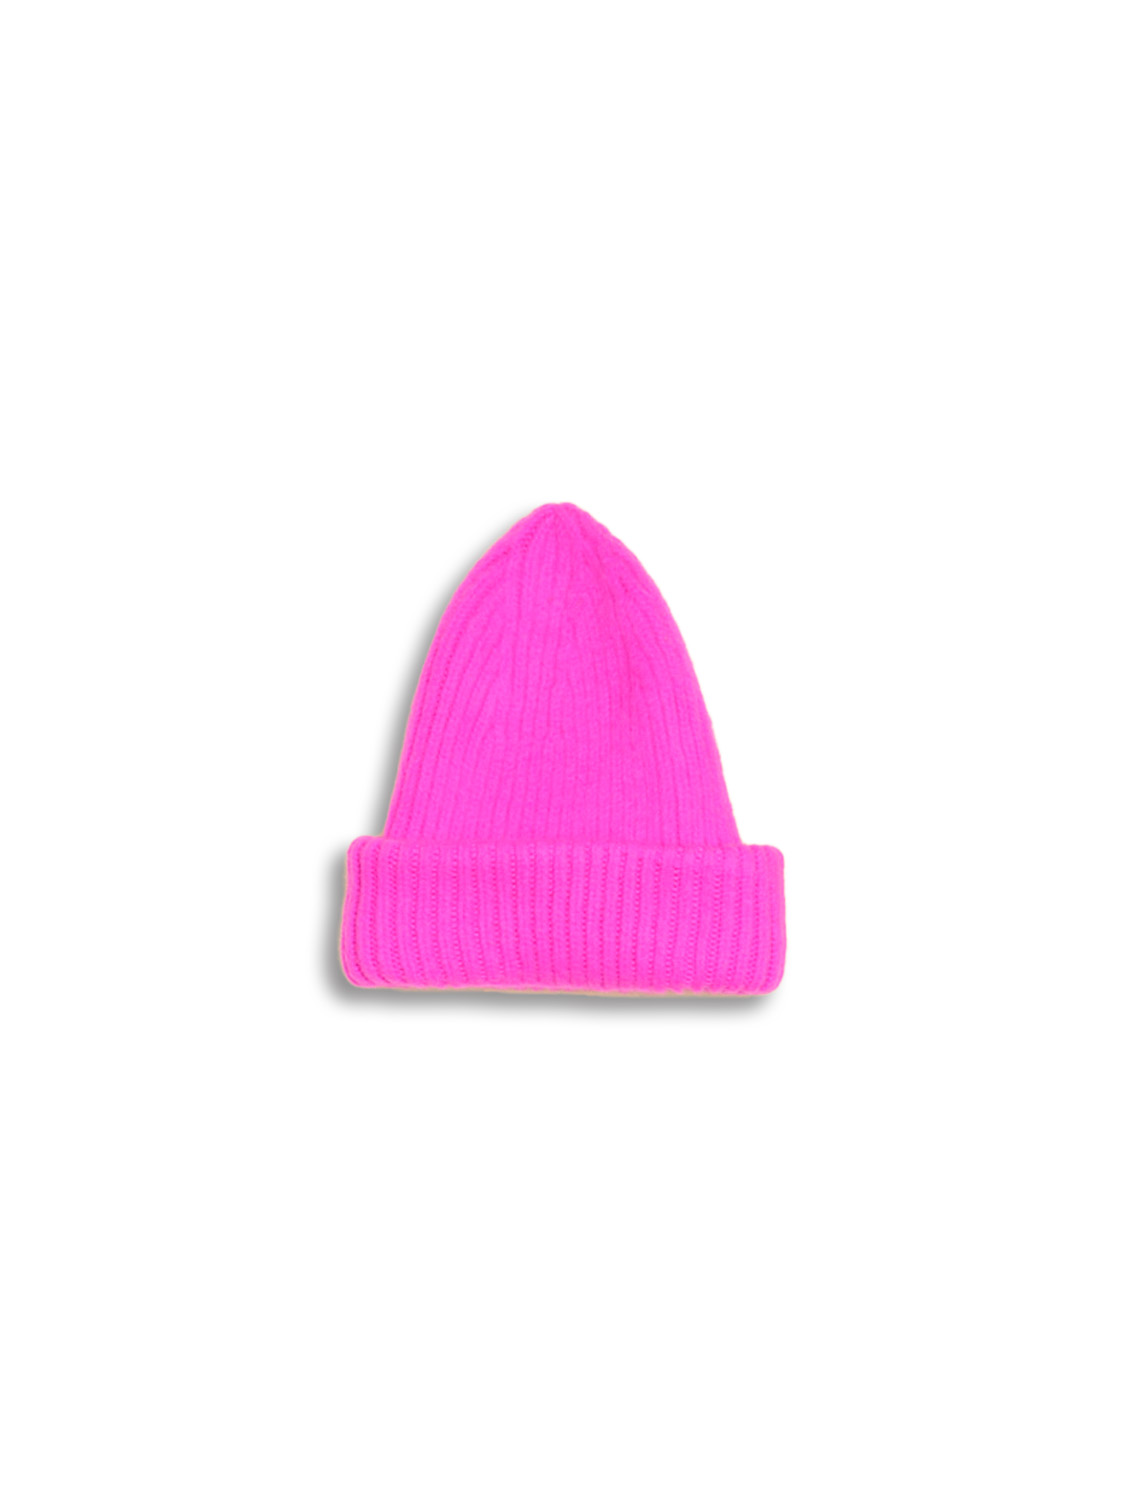 Unisex knitted hat - cashmere wool knitted hat